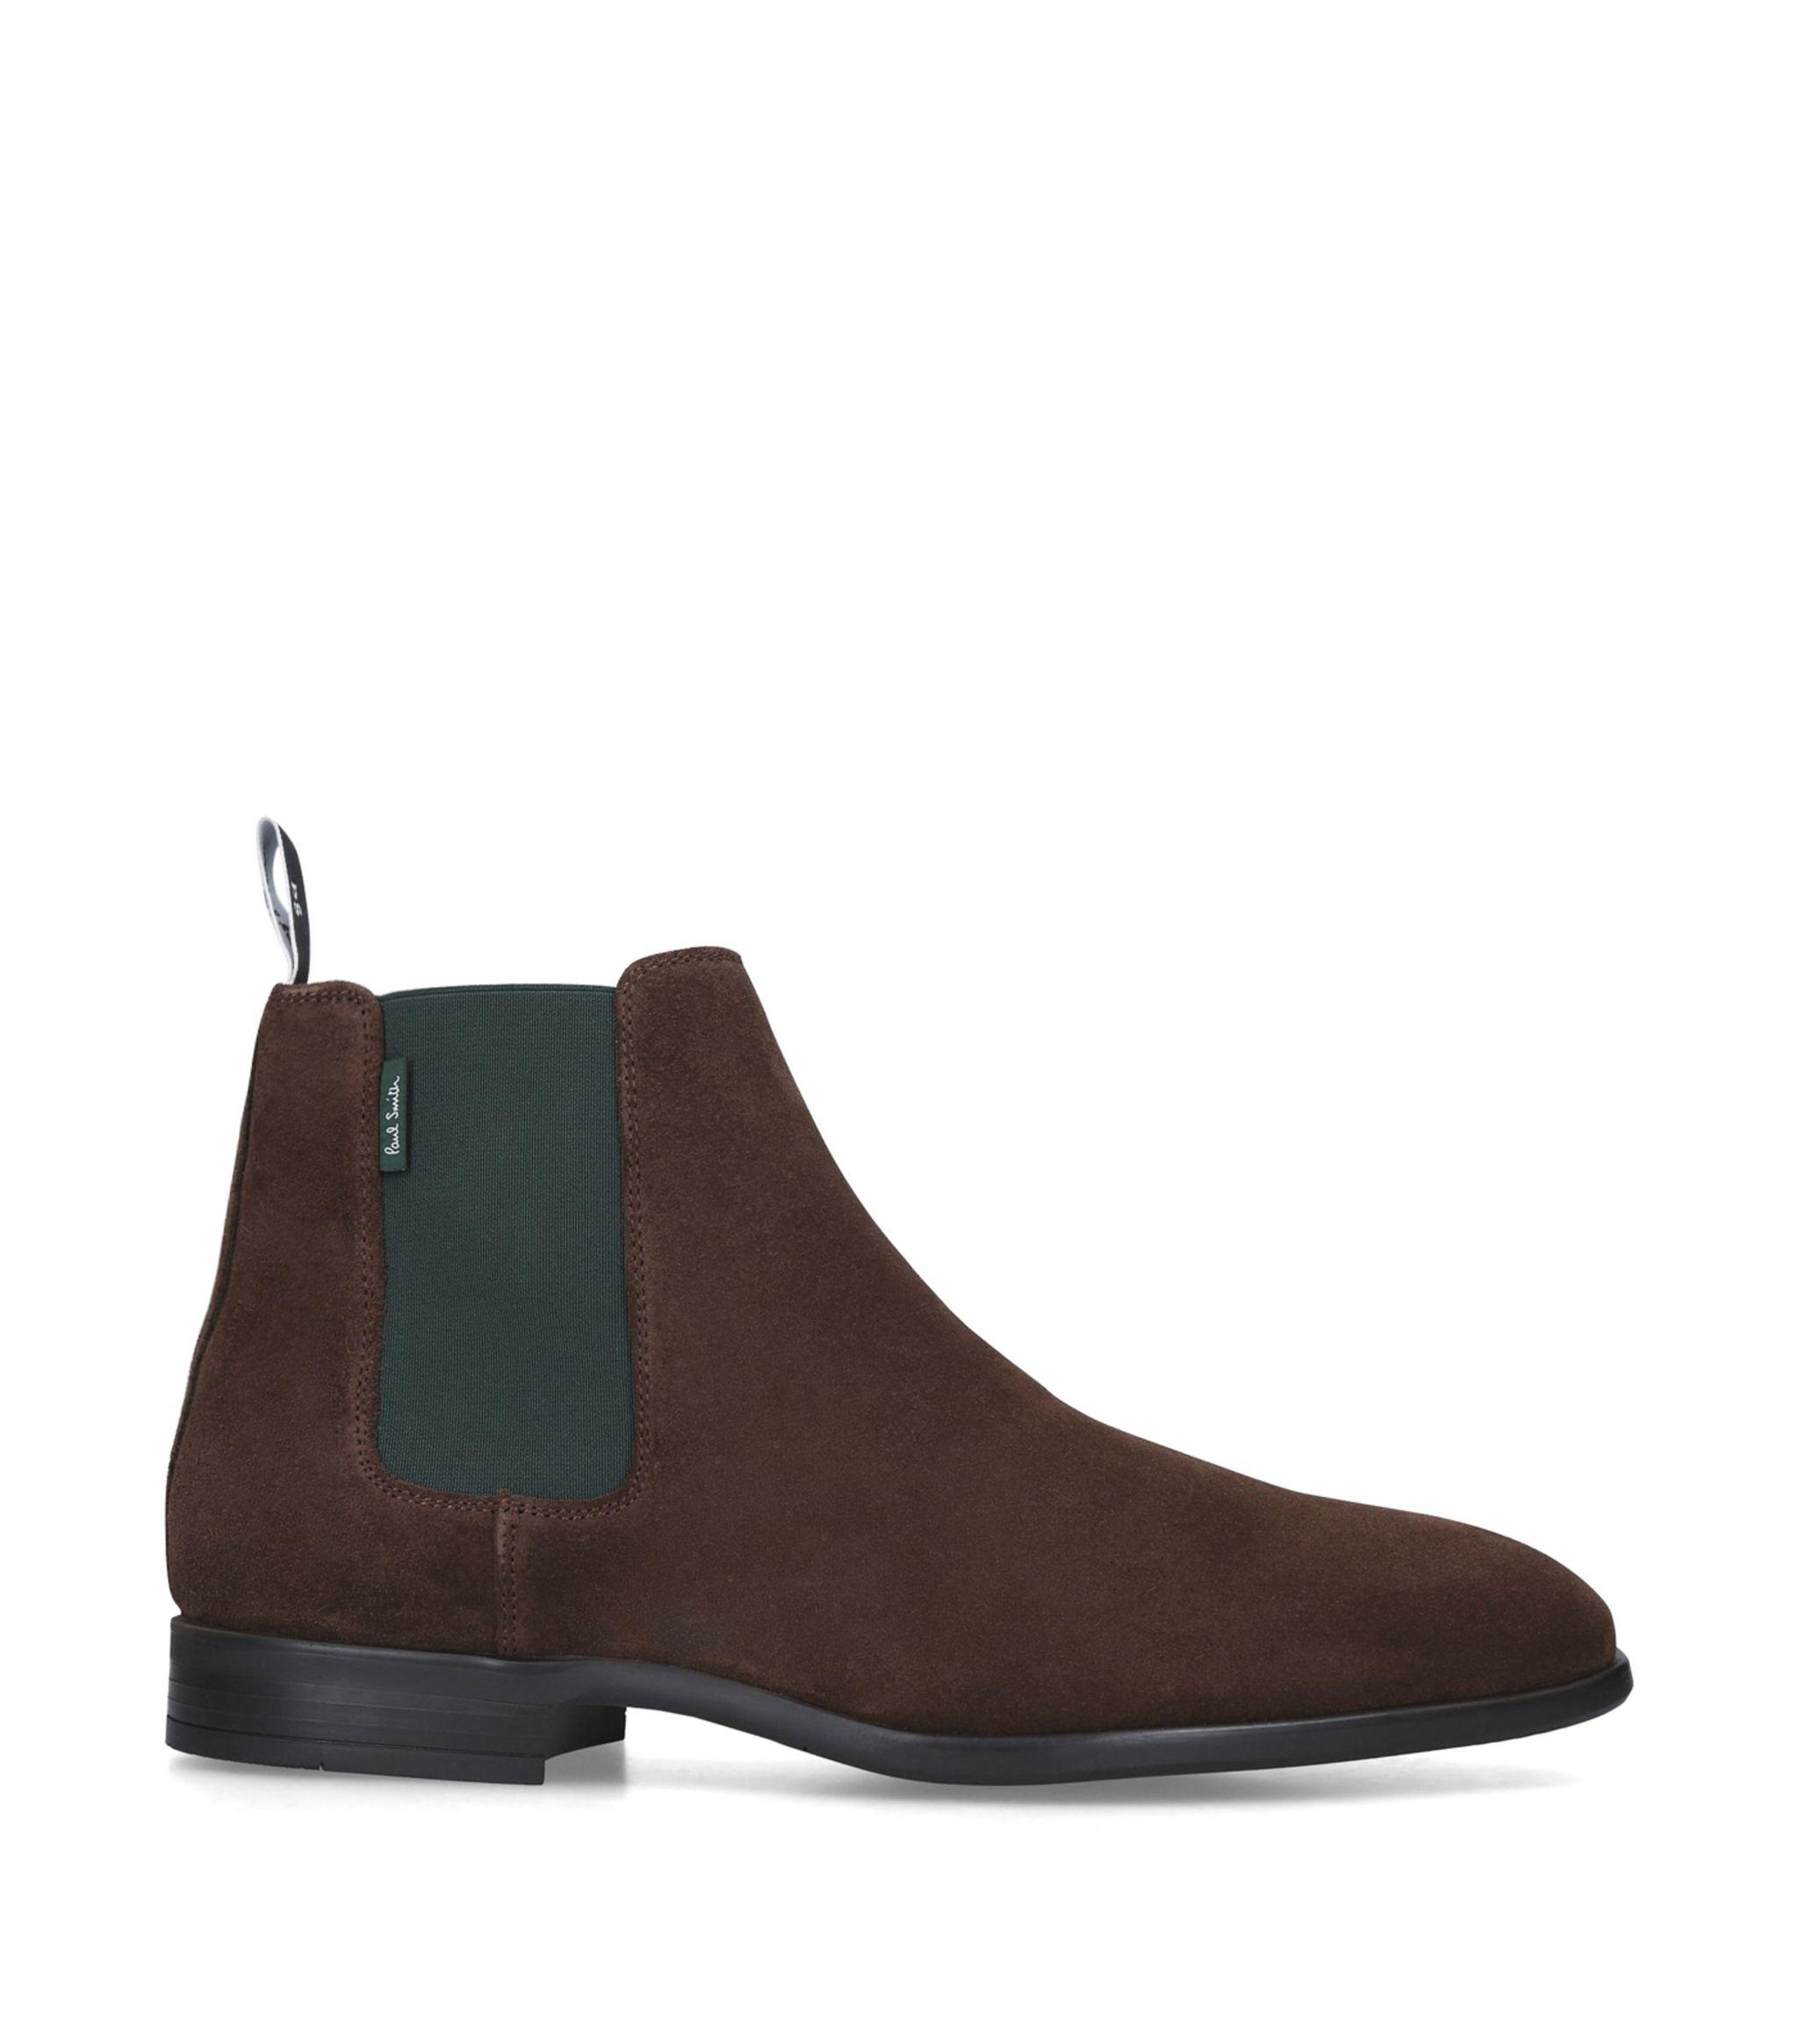 Paul Smith Suede Gerald Chelsea Boots in Brown for Men - Lyst